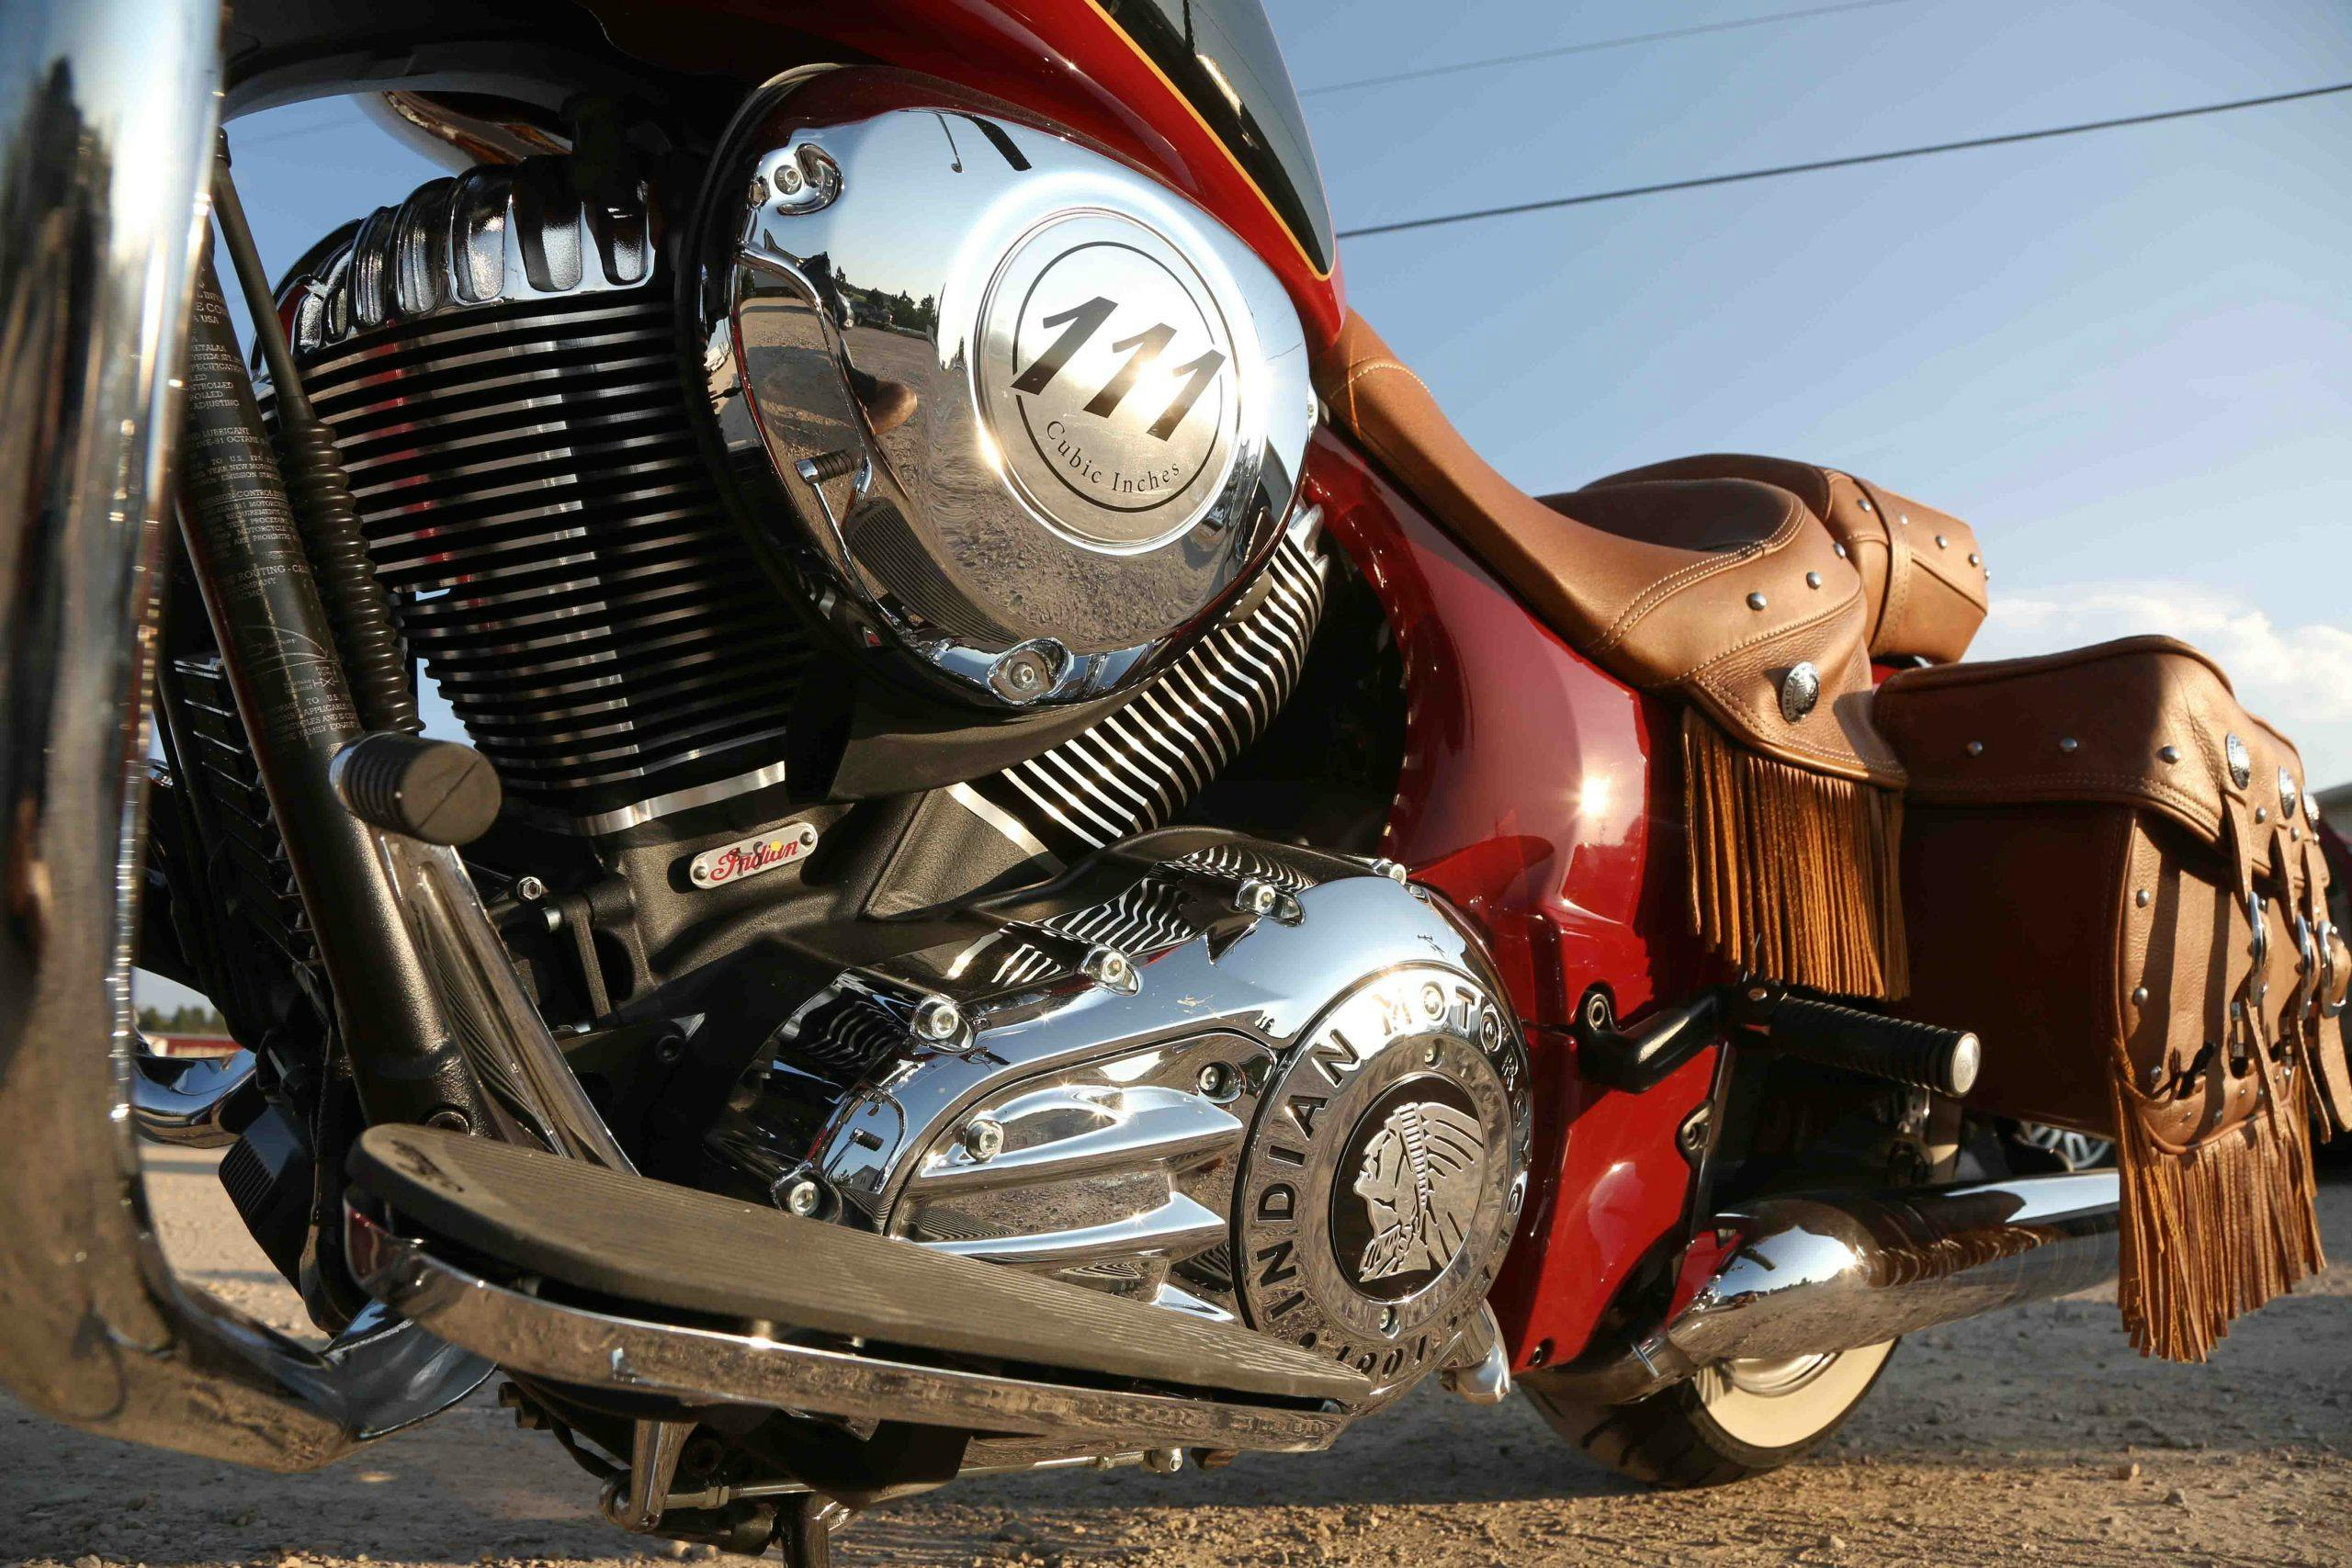 Indian Chief motorcycle cruiser engine